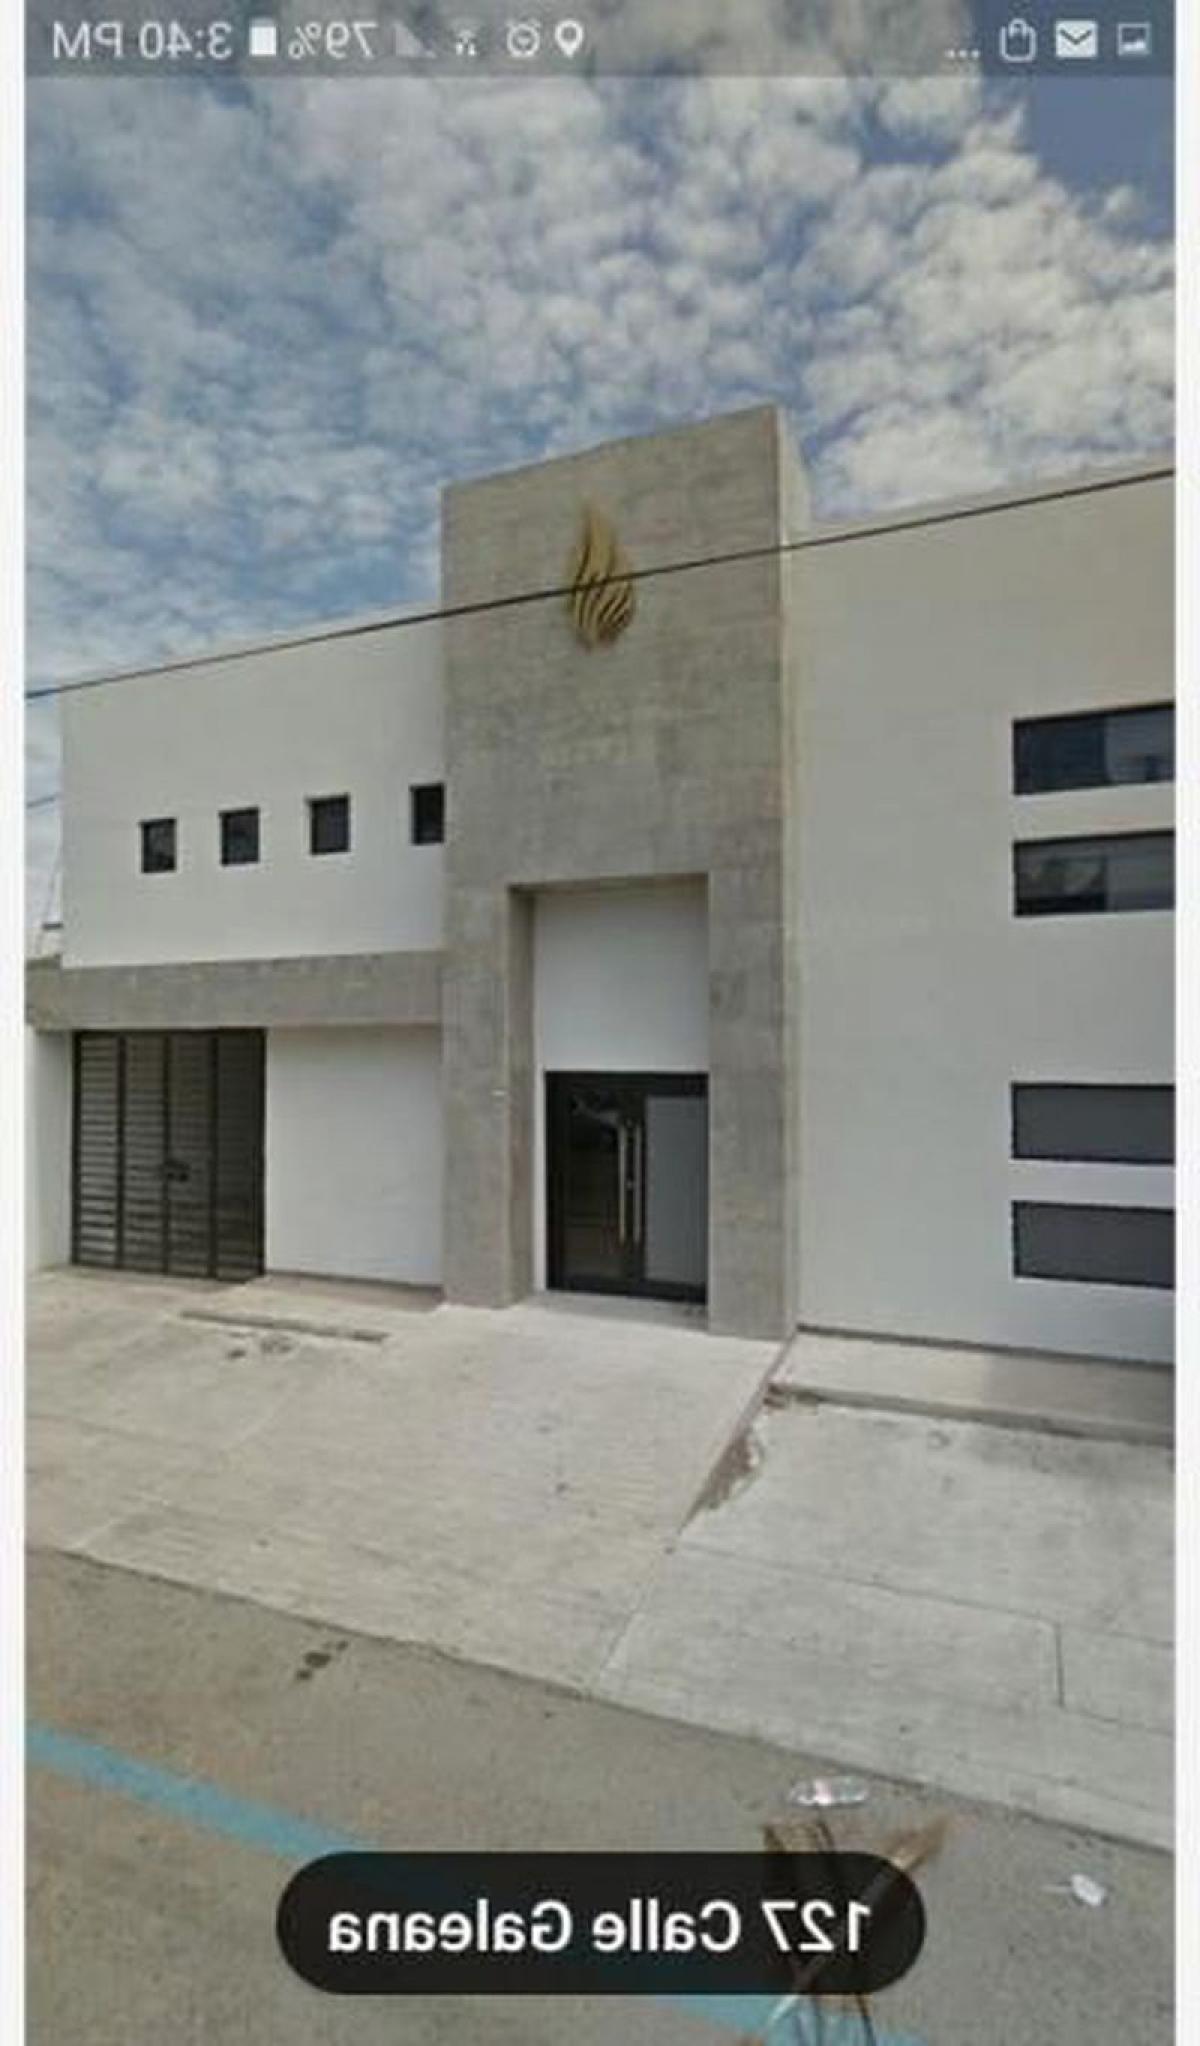 Picture of Apartment Building For Sale in Sonora, Sonora, Mexico